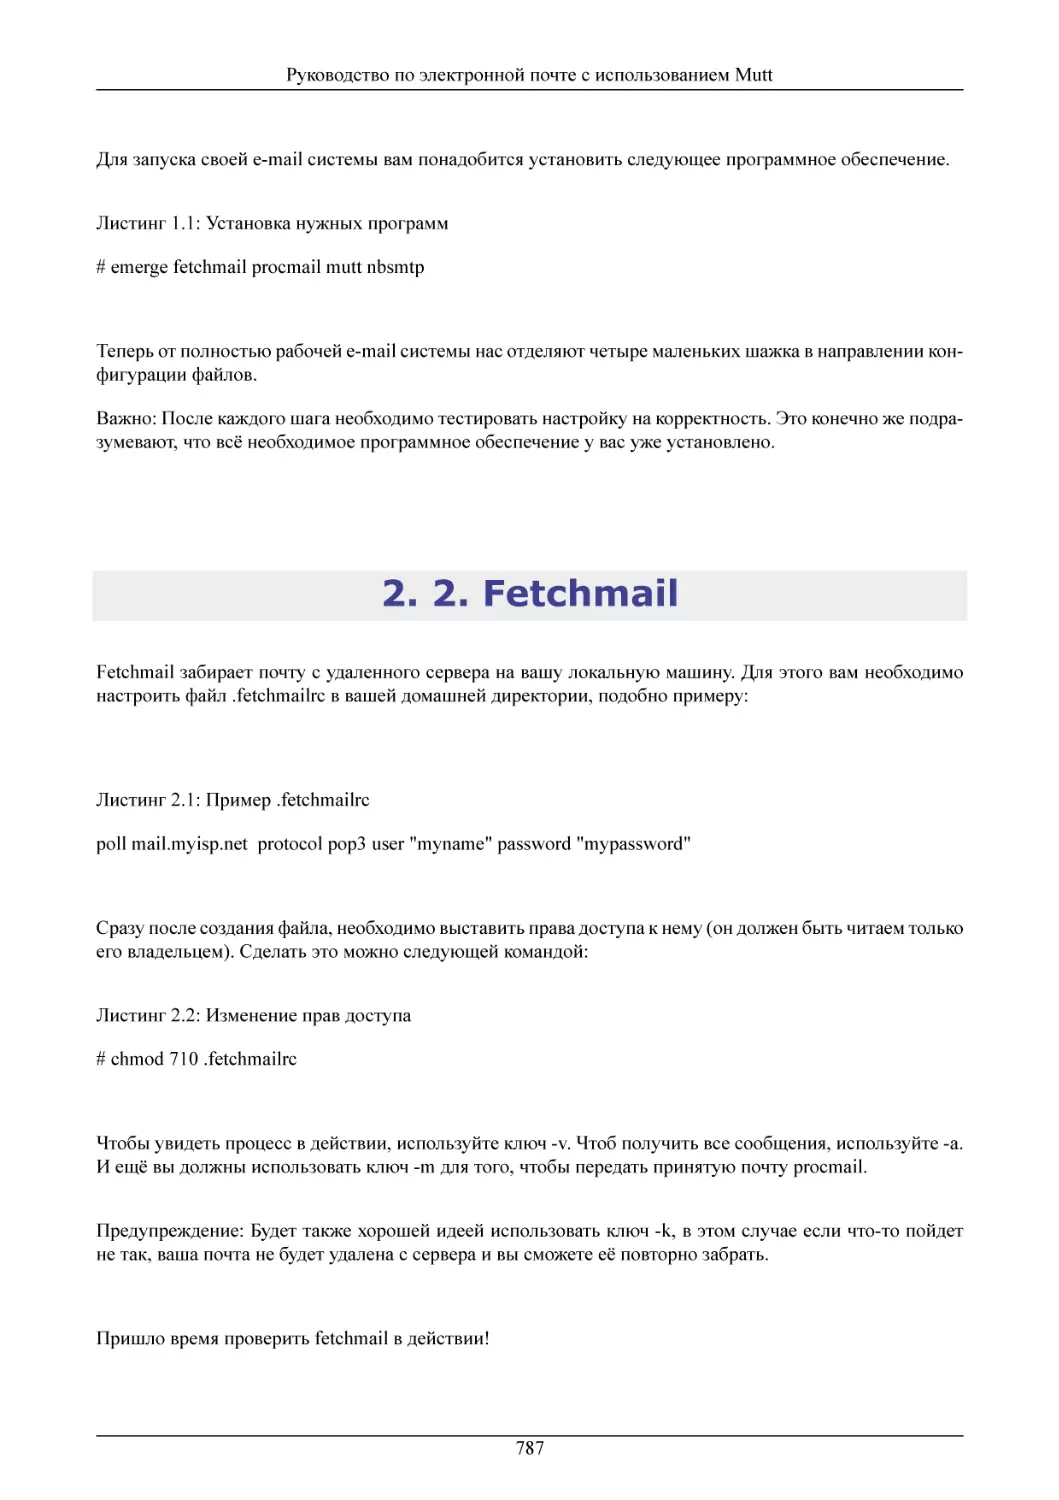 2. Fetchmail